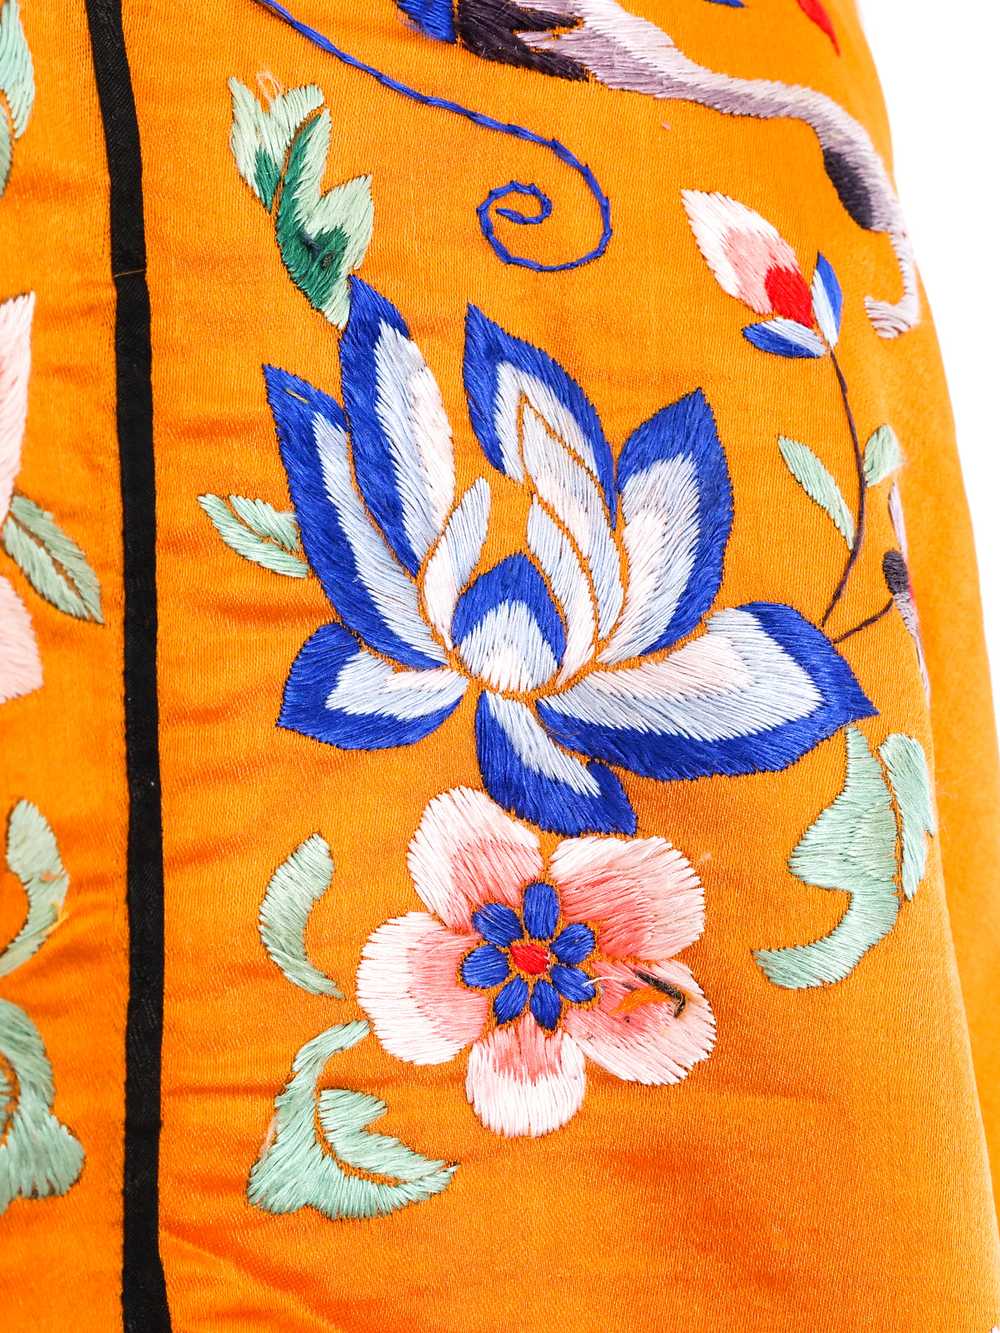 Embroidered Silk Chinese Jacket - image 6